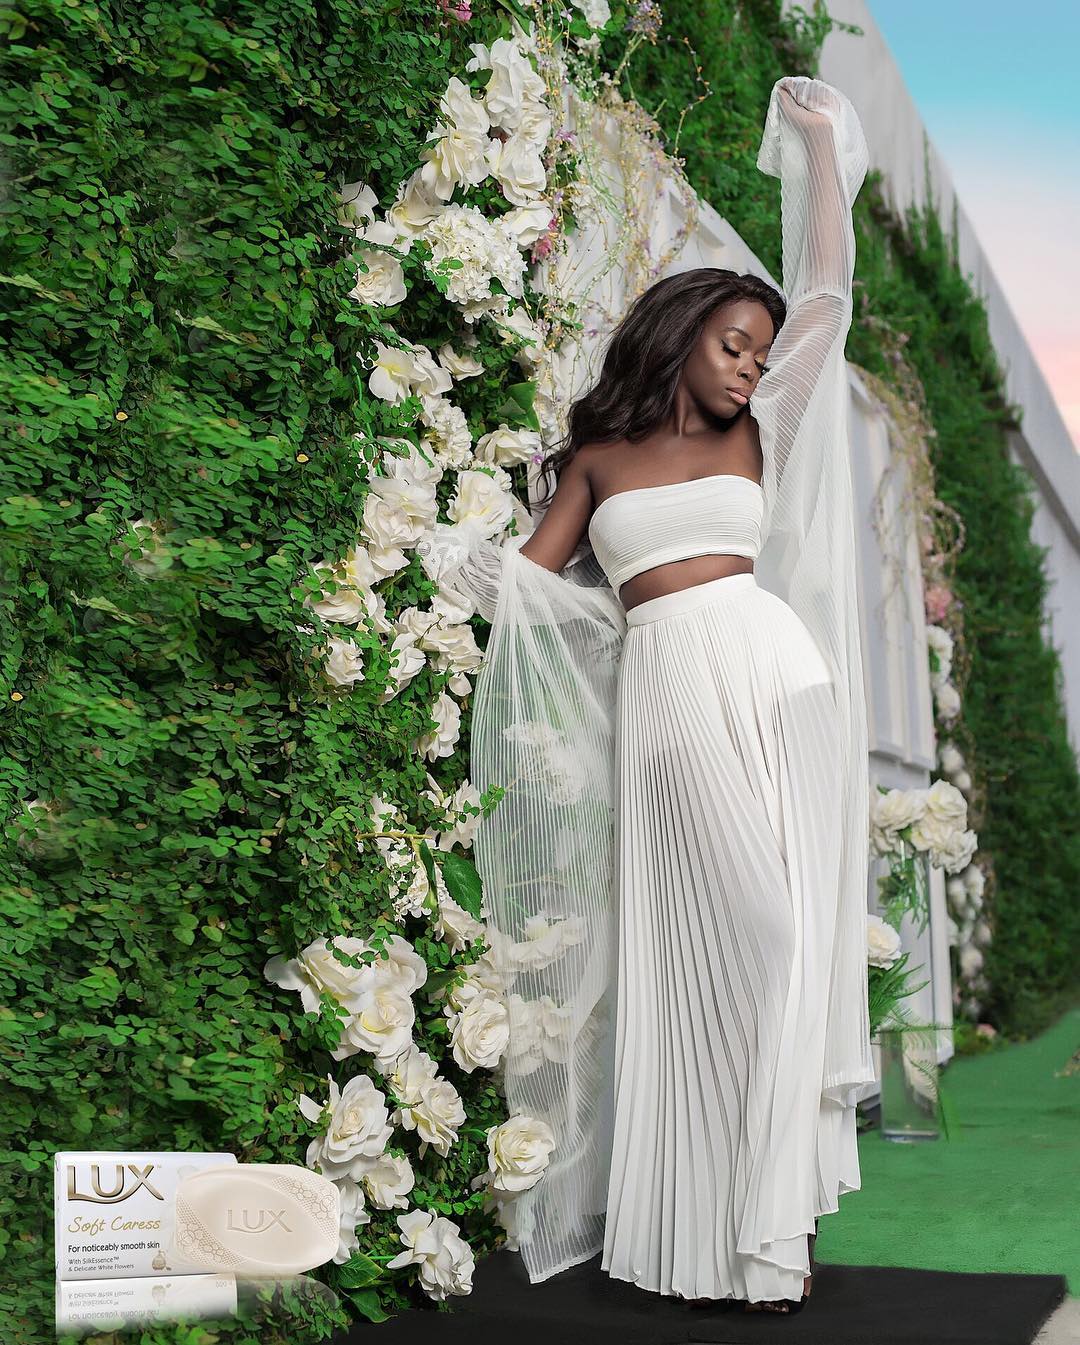 #ThrowbackThursday: The LUX By Maju Collection Was Beyond Stunning!